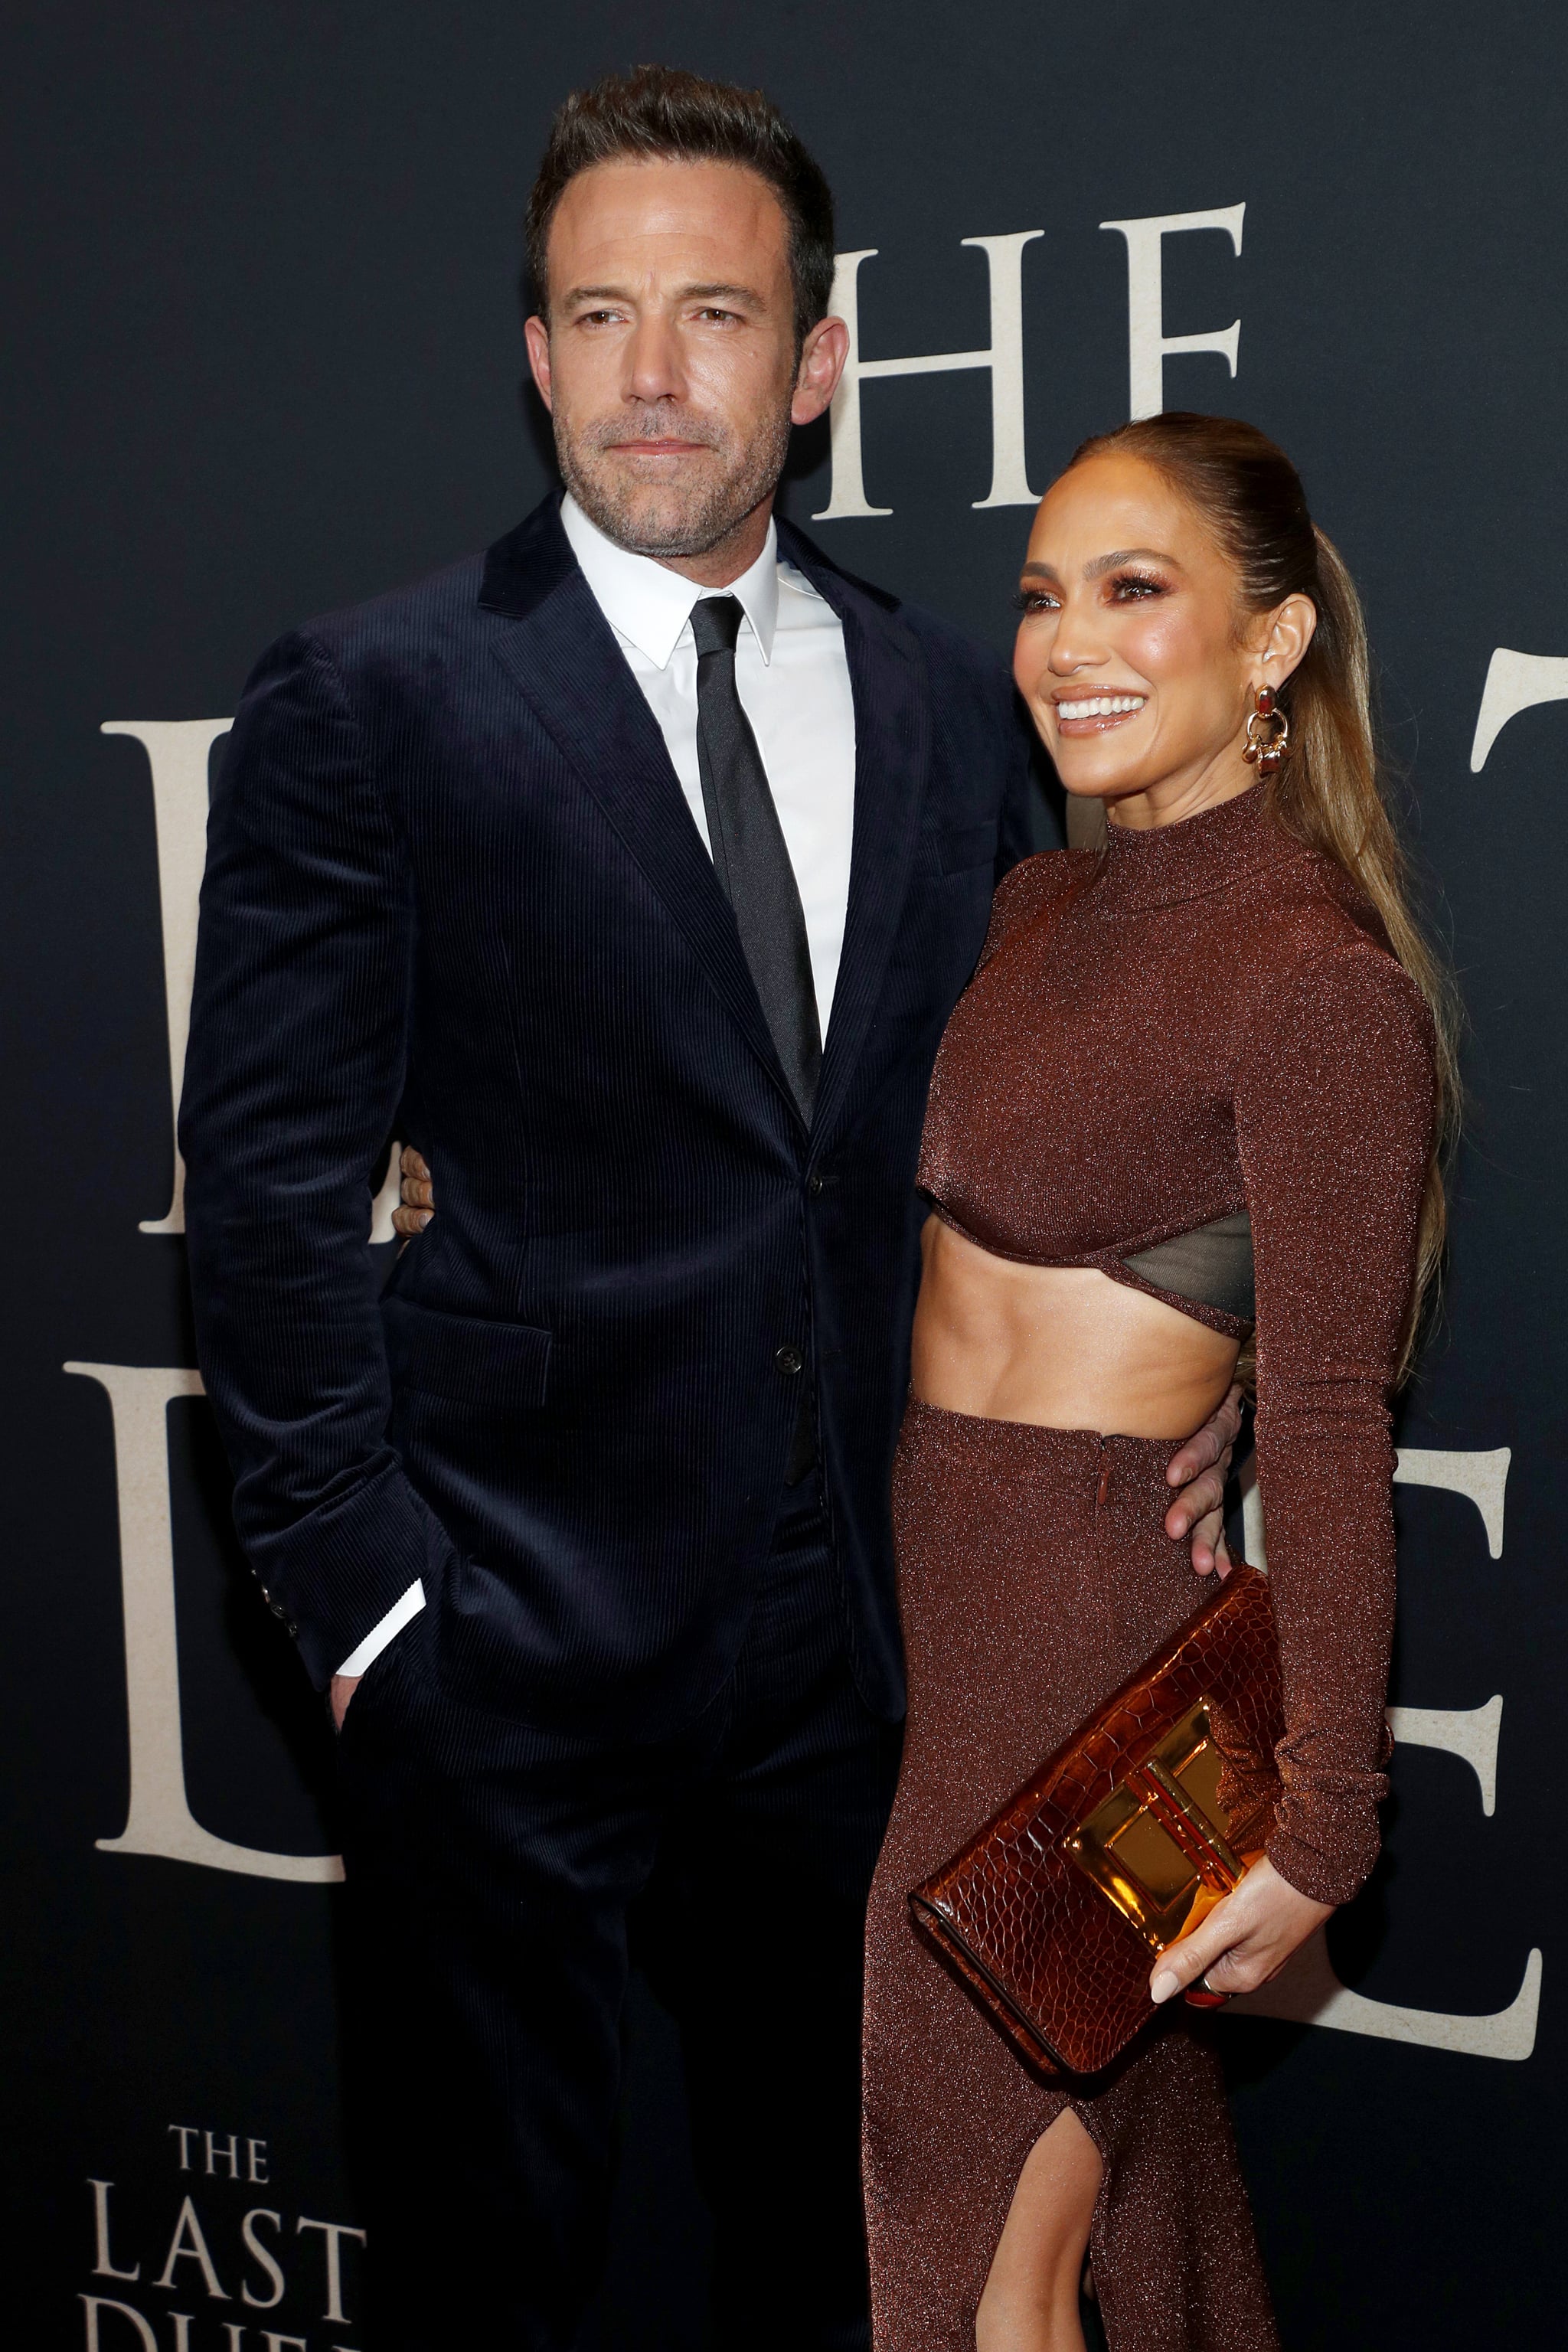 NEW YORK, NEW YORK - OCTOBER 09: Ben Affleck (L) and Jennifer Lopez attend The Last Duel New York Premiere on October 09, 2021 in New York City. (Photo by Astrid Stawiarz/Getty Images for 20th Century Studios)